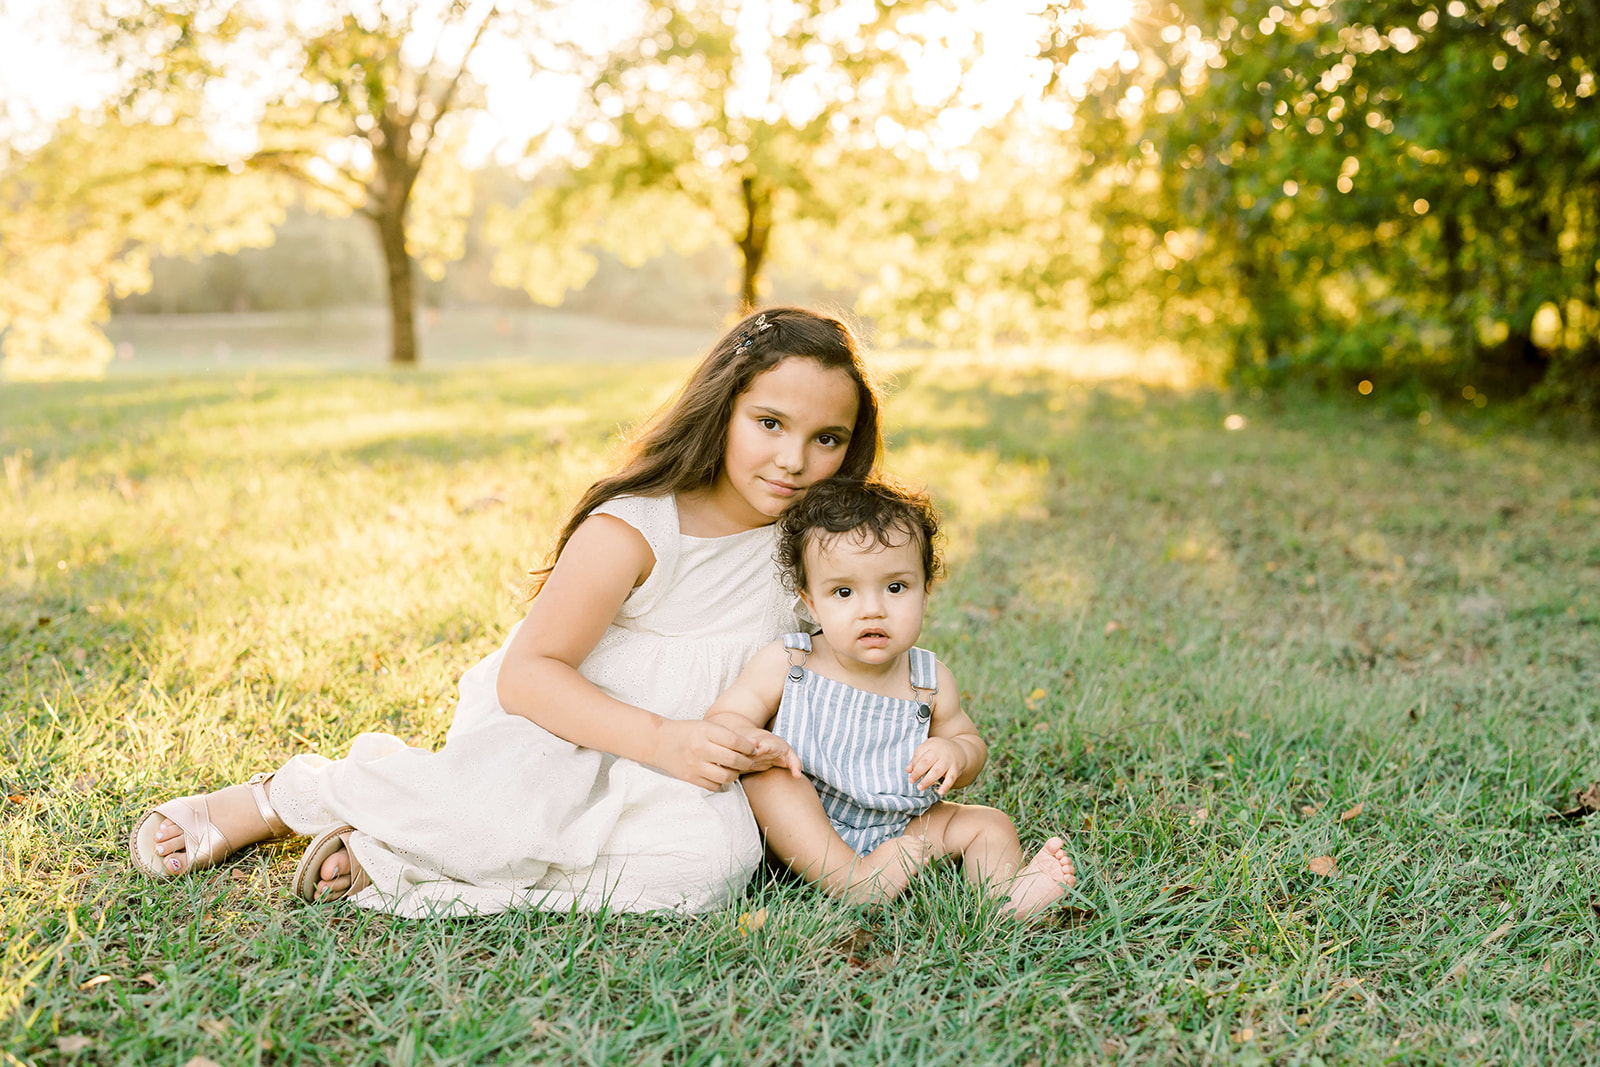 A young girl in a white dress sits in a lawn at sunset with her baby sibling after meeting Houston Babysitters